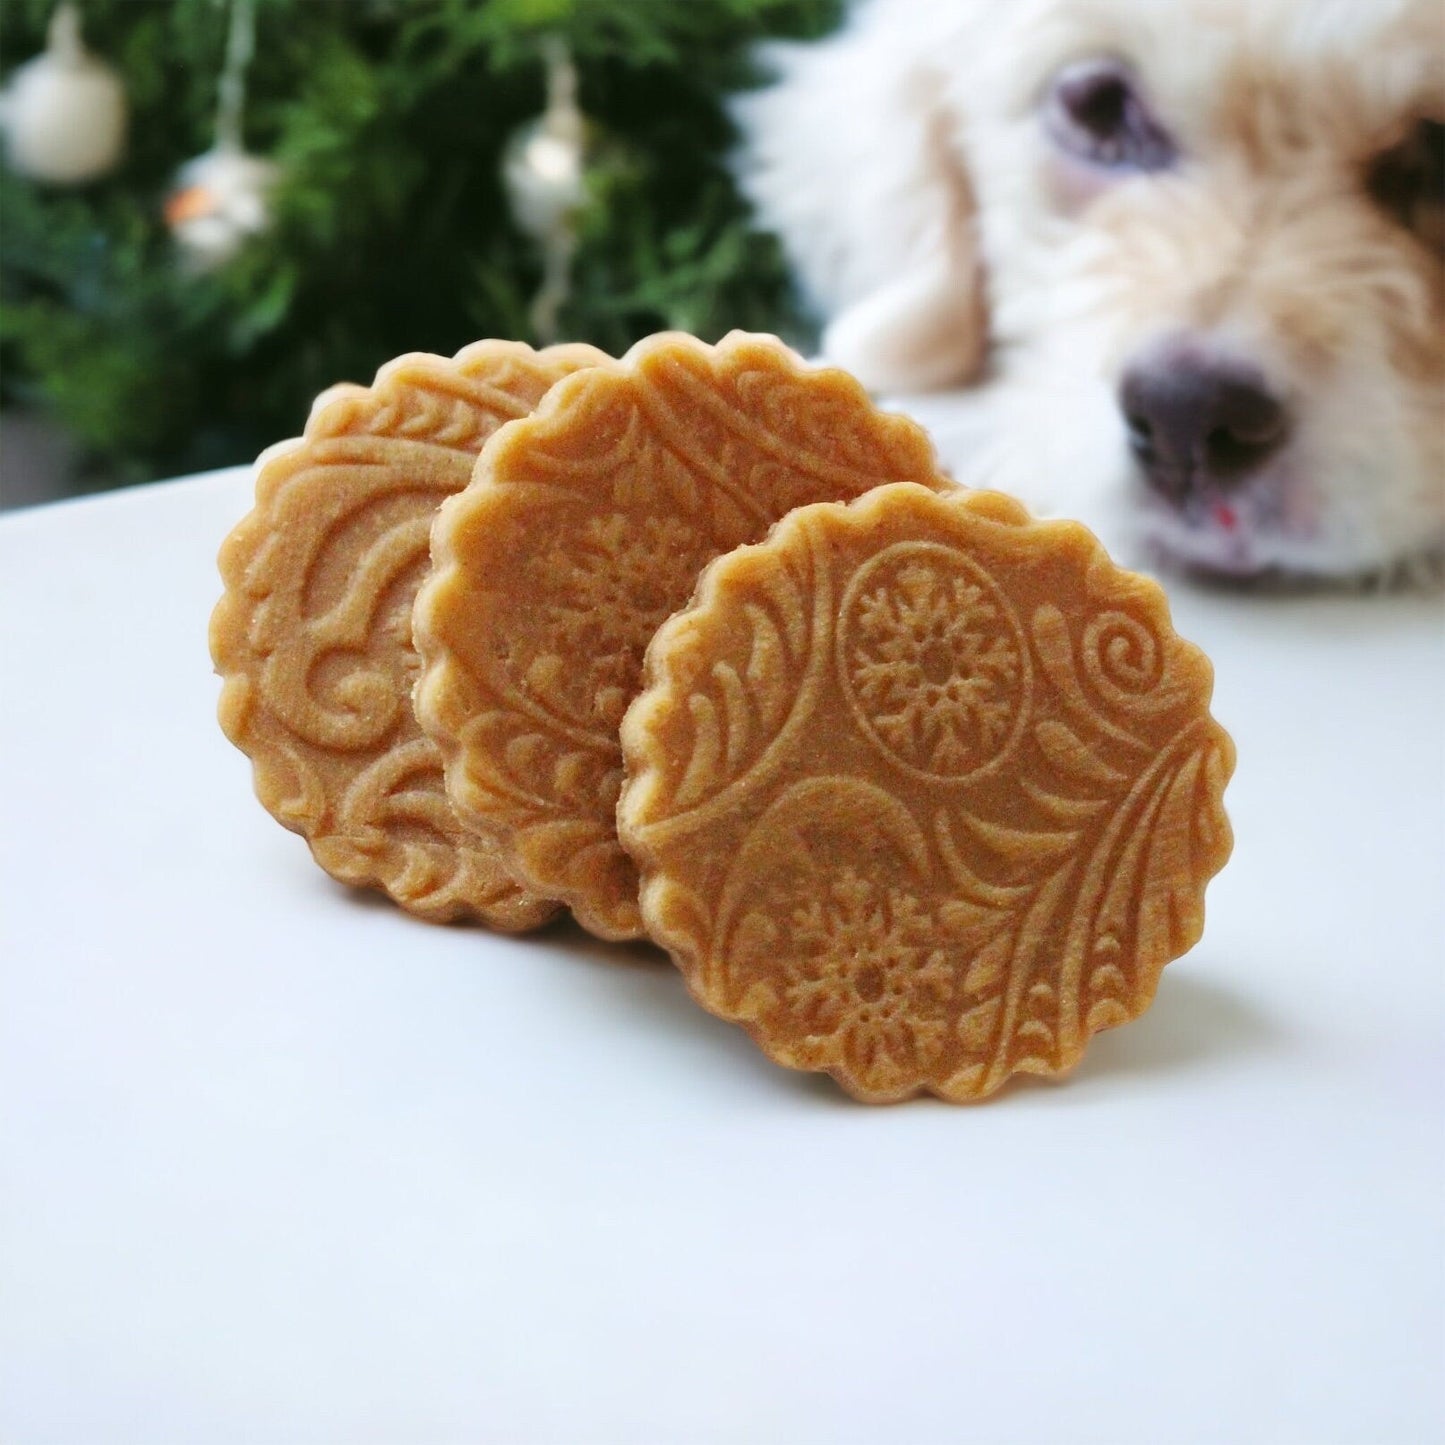 peanut butter dog biscuits with folk pattern - 2